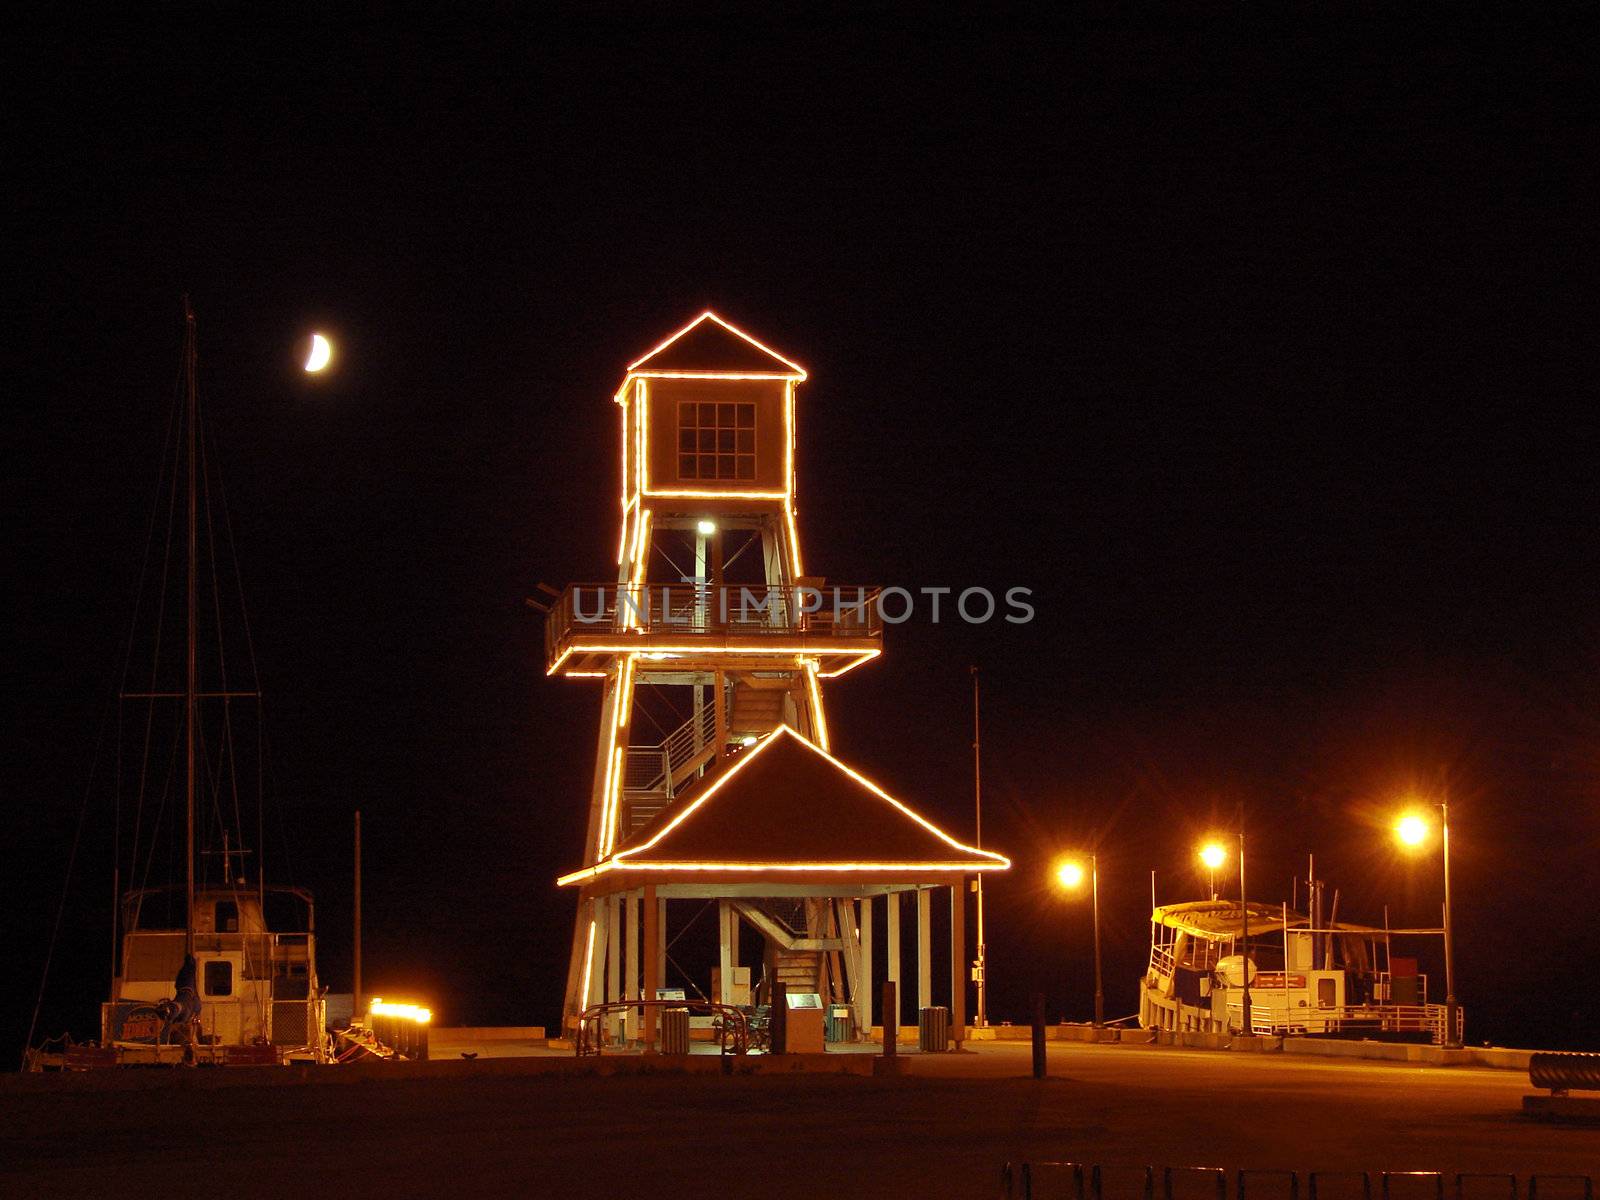 Wharf at night by Thorvis